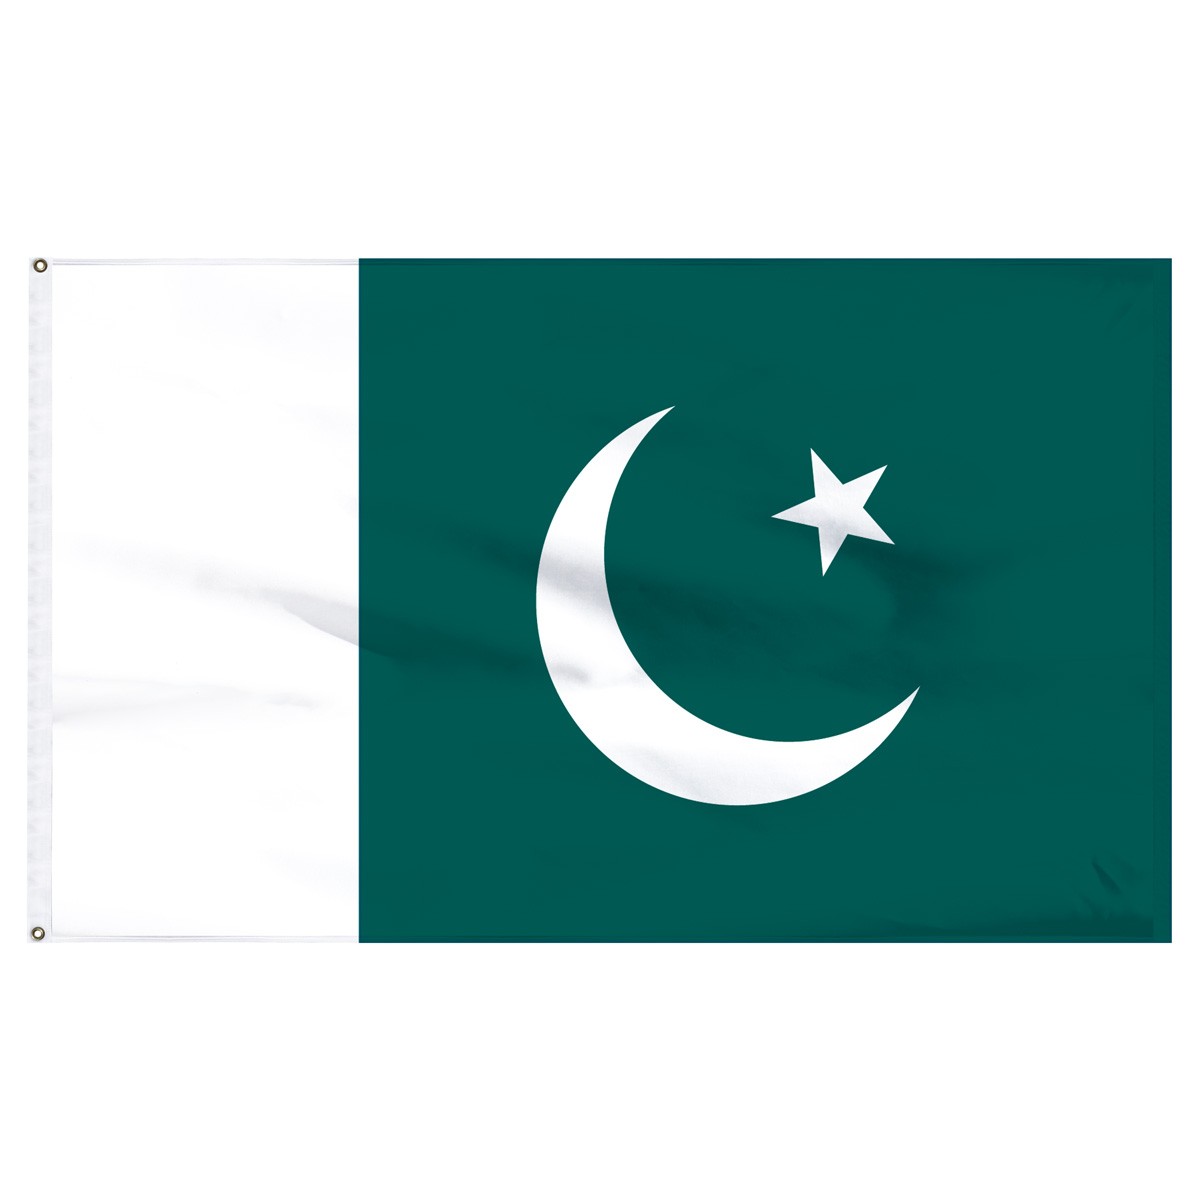 Pakistan Submit Flags and Flags